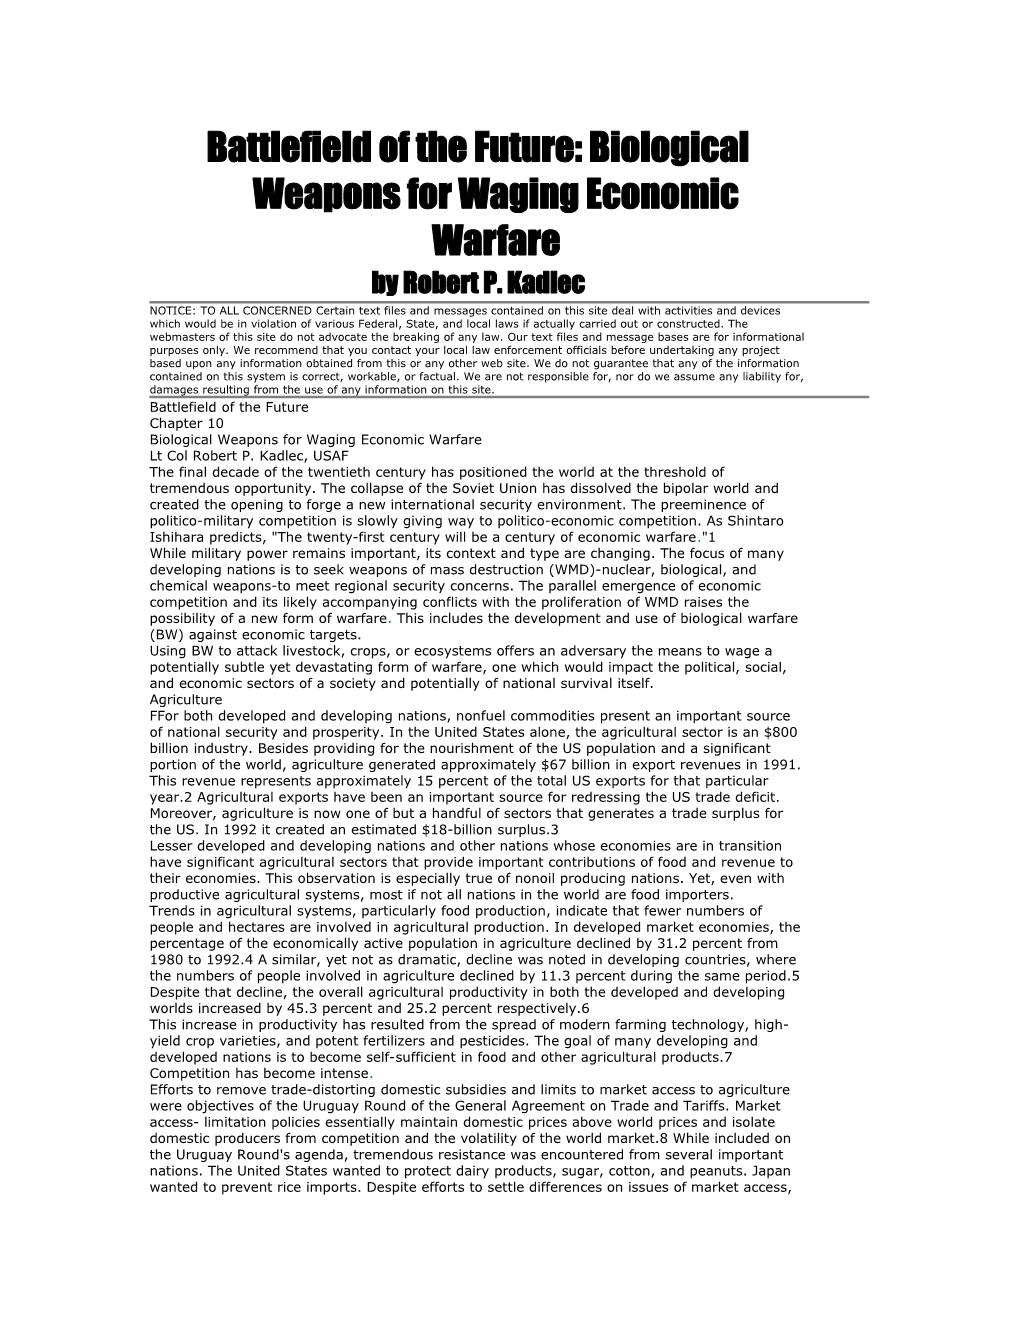 Battlefield of the Future: Biological Weapons for Waging Economic Warfare